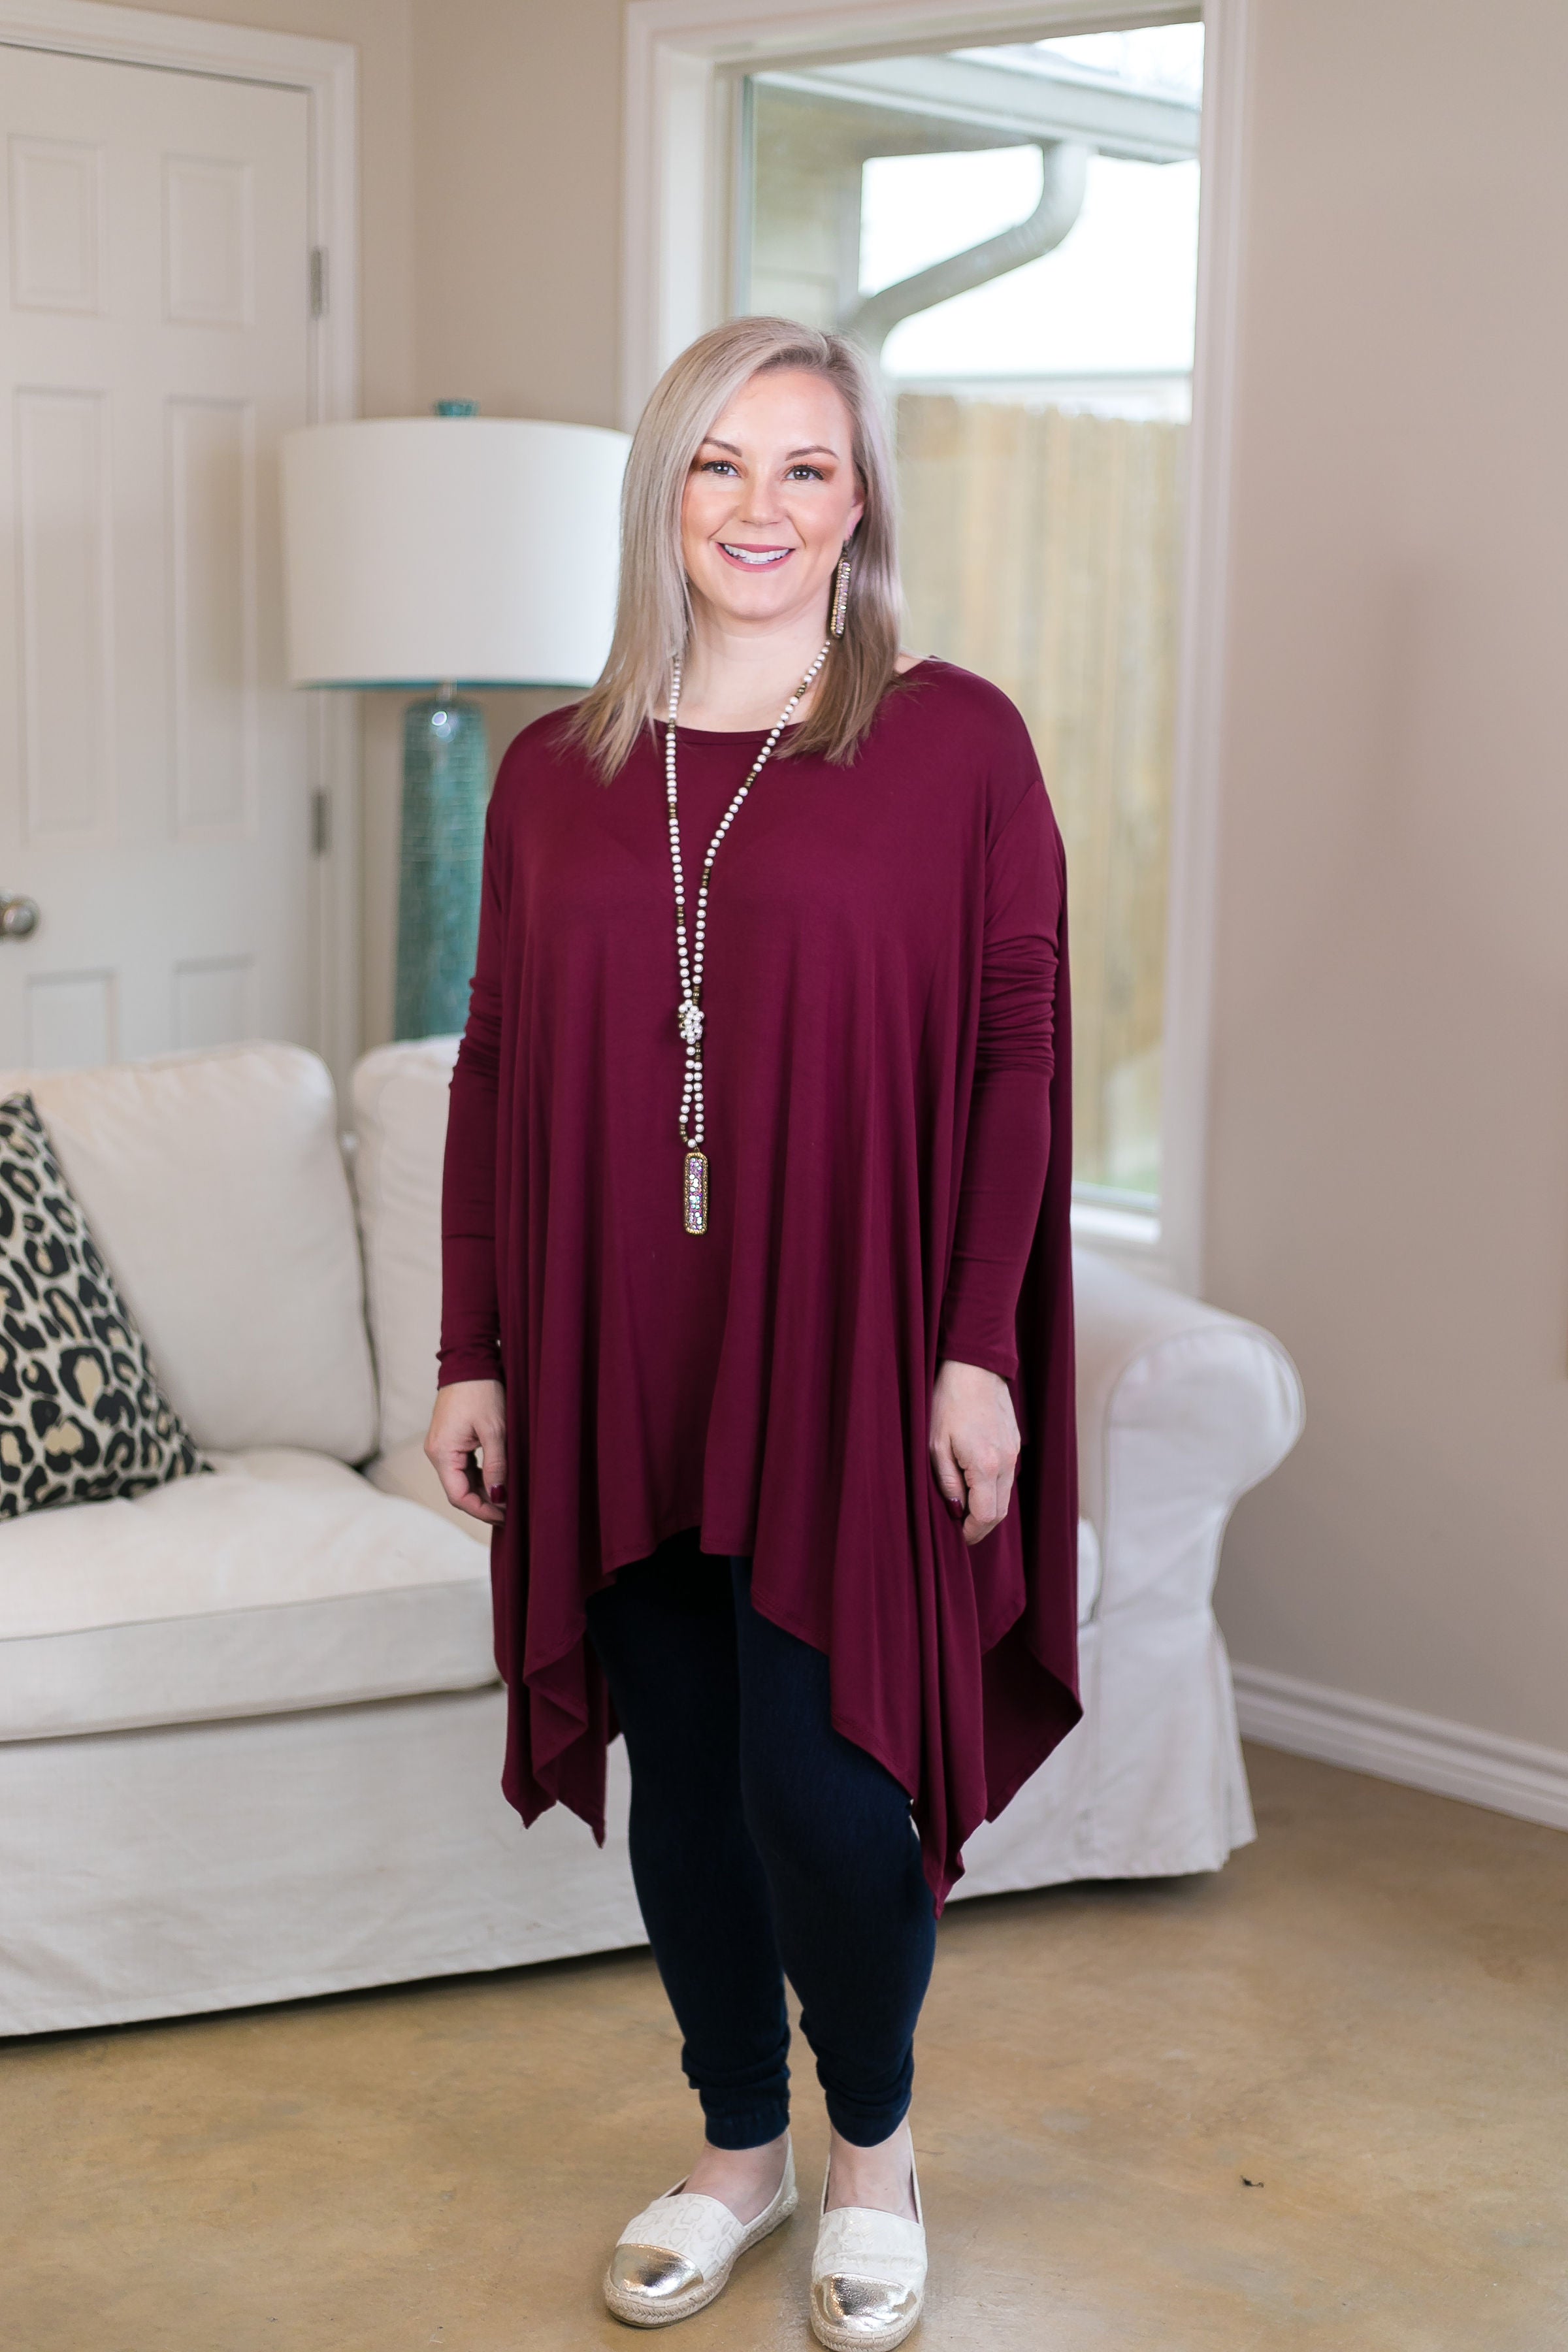 Last Chance S & M | Perfect Getaway Handkerchief Top in Maroon - Giddy Up Glamour Boutique